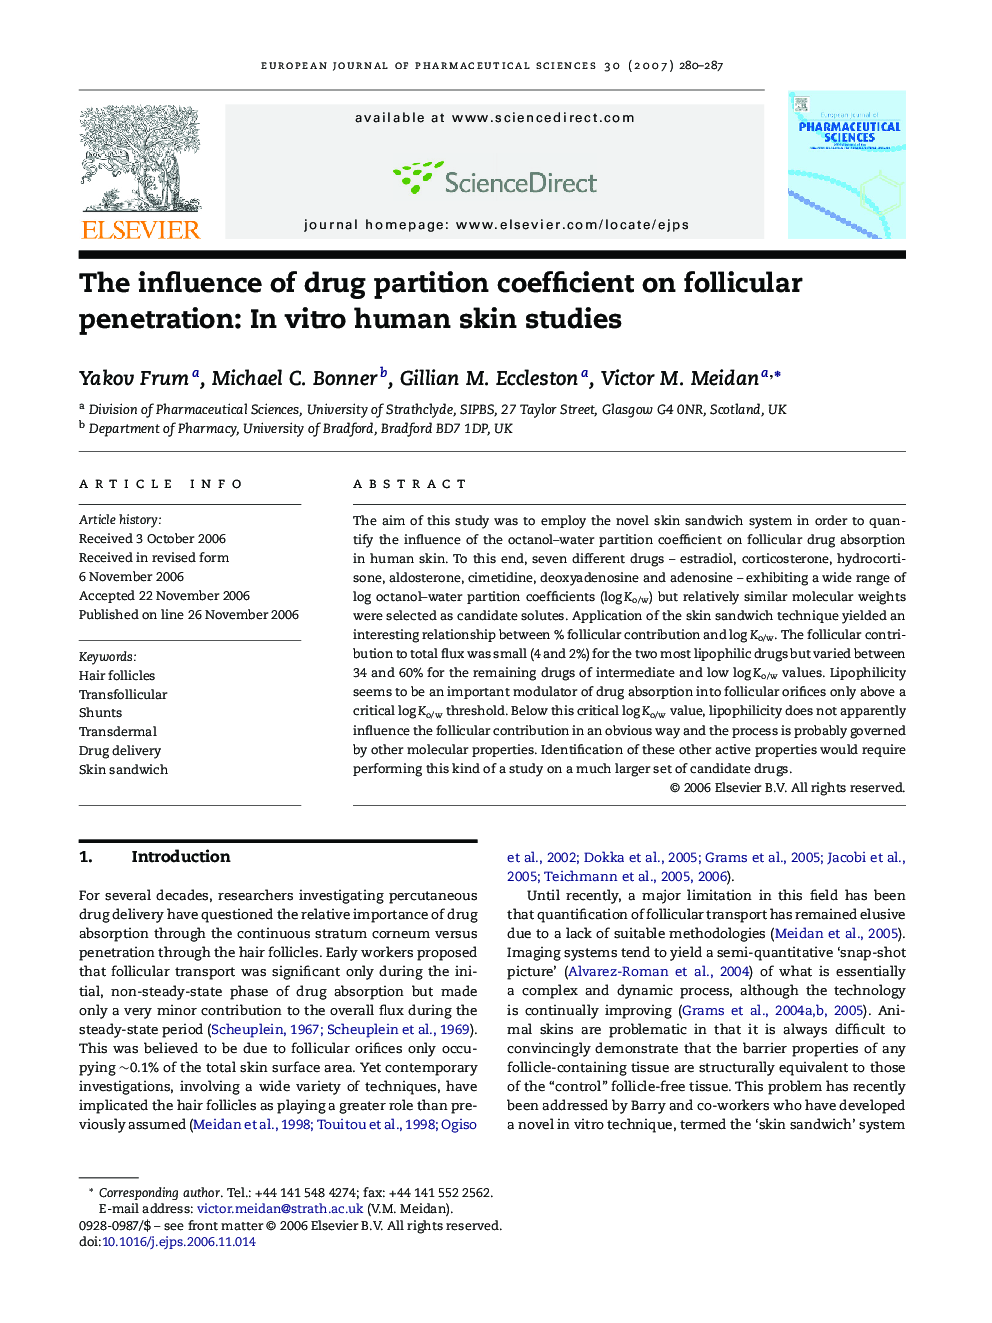 The influence of drug partition coefficient on follicular penetration: In vitro human skin studies